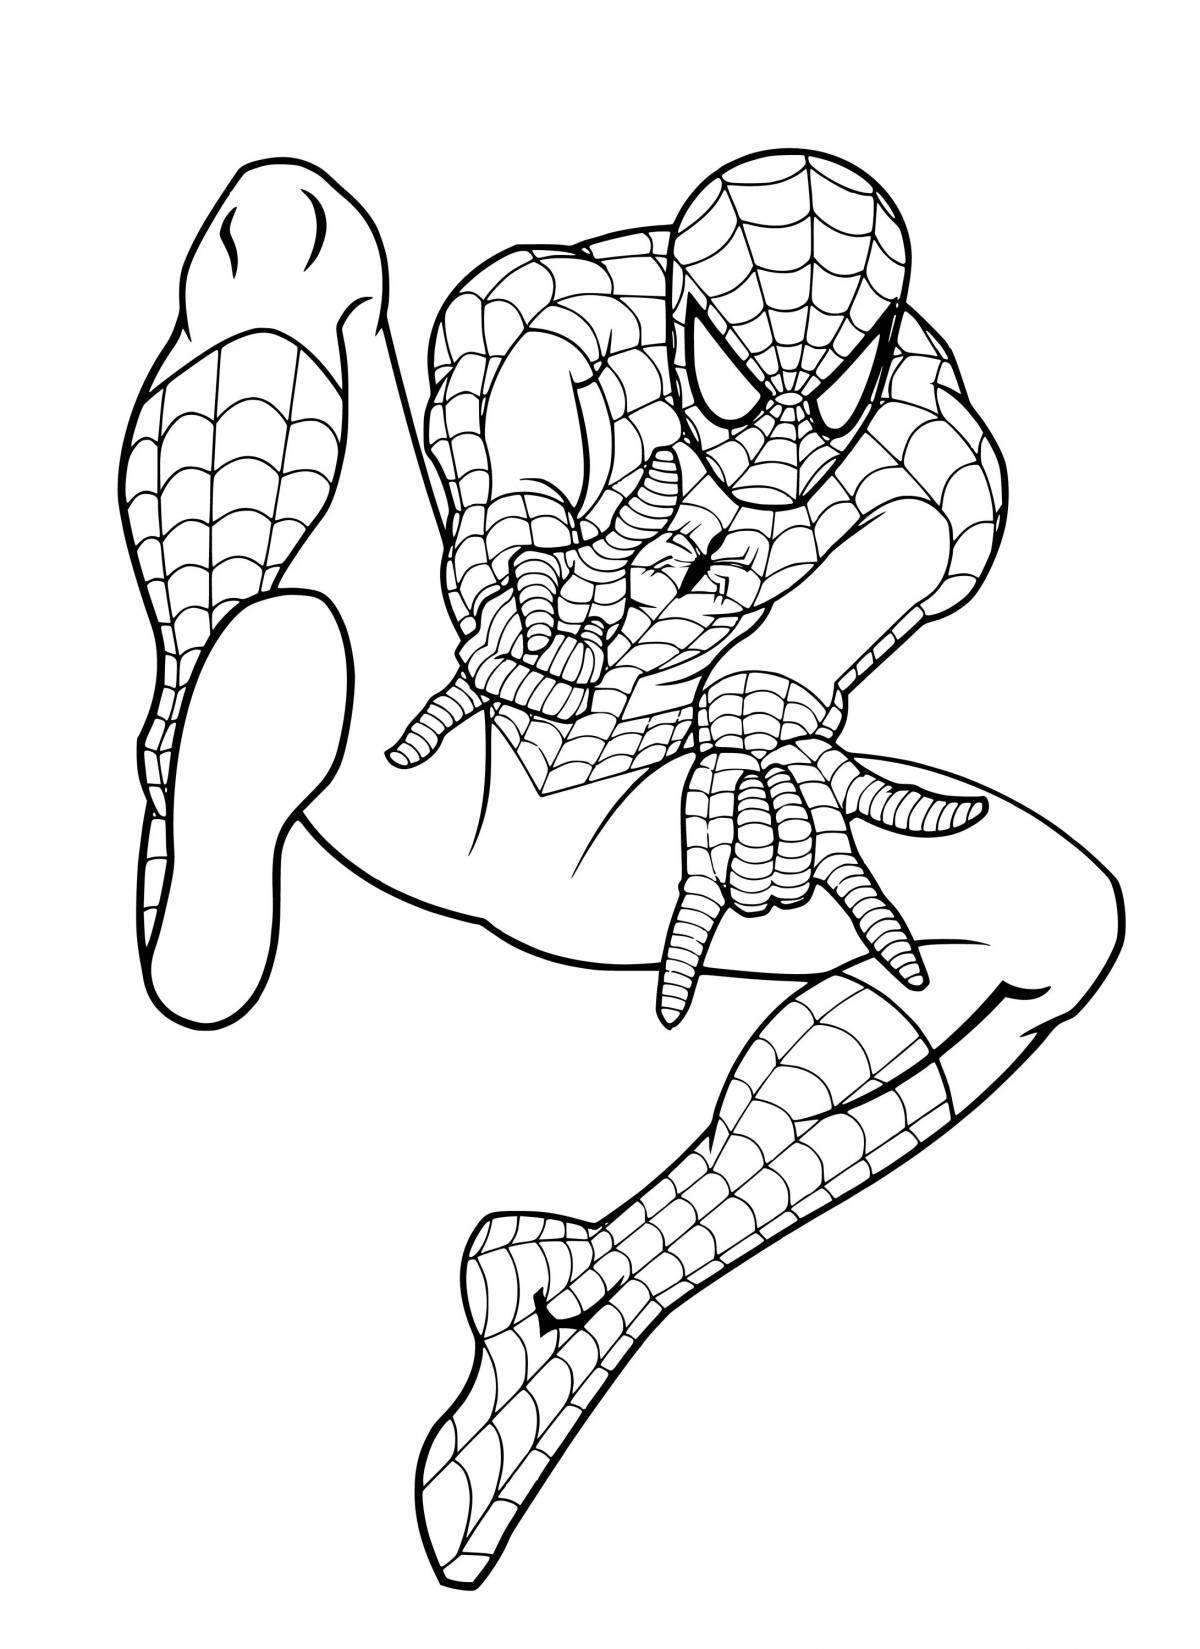 Spiderman's fun coloring page